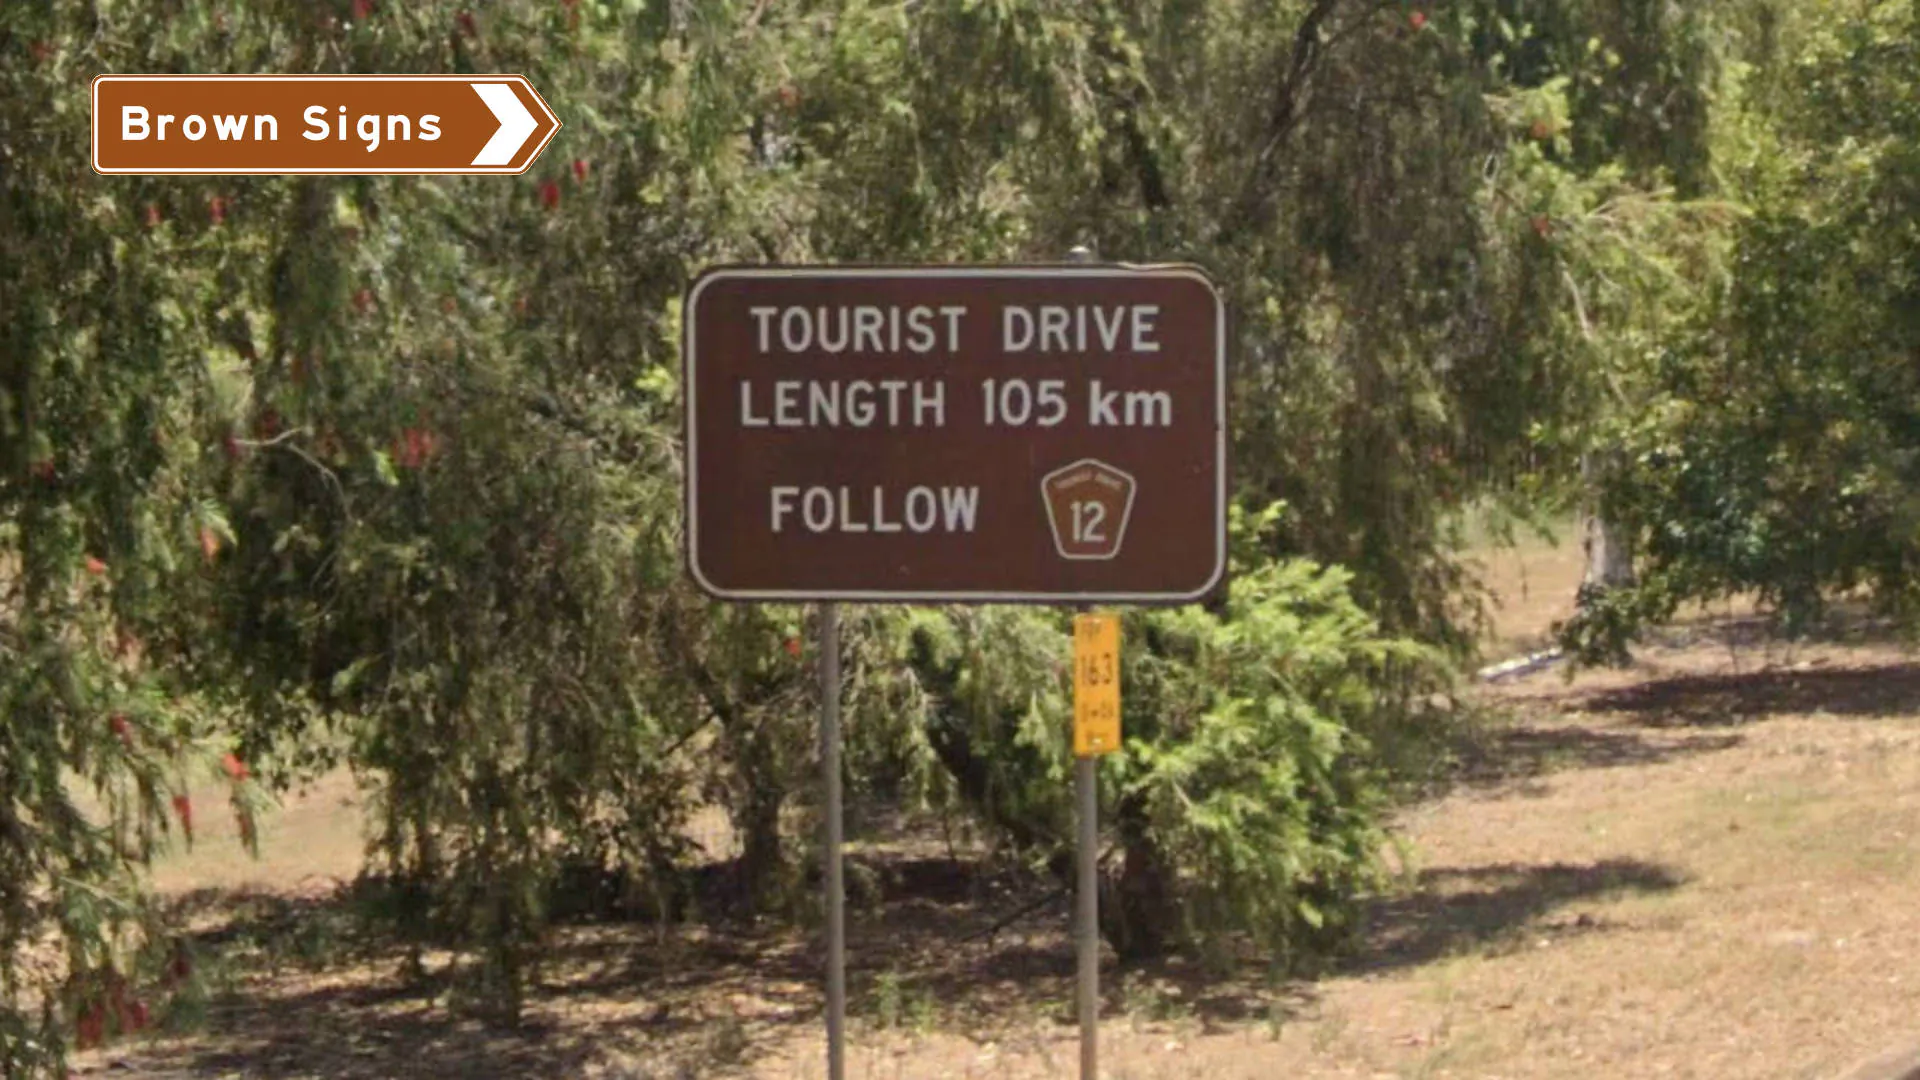 Brown sign for the Fraser Coast Tourist Drive, showing the start of Tourist Drive, length of 105km and a tourist drive symbol for tourist drive 12